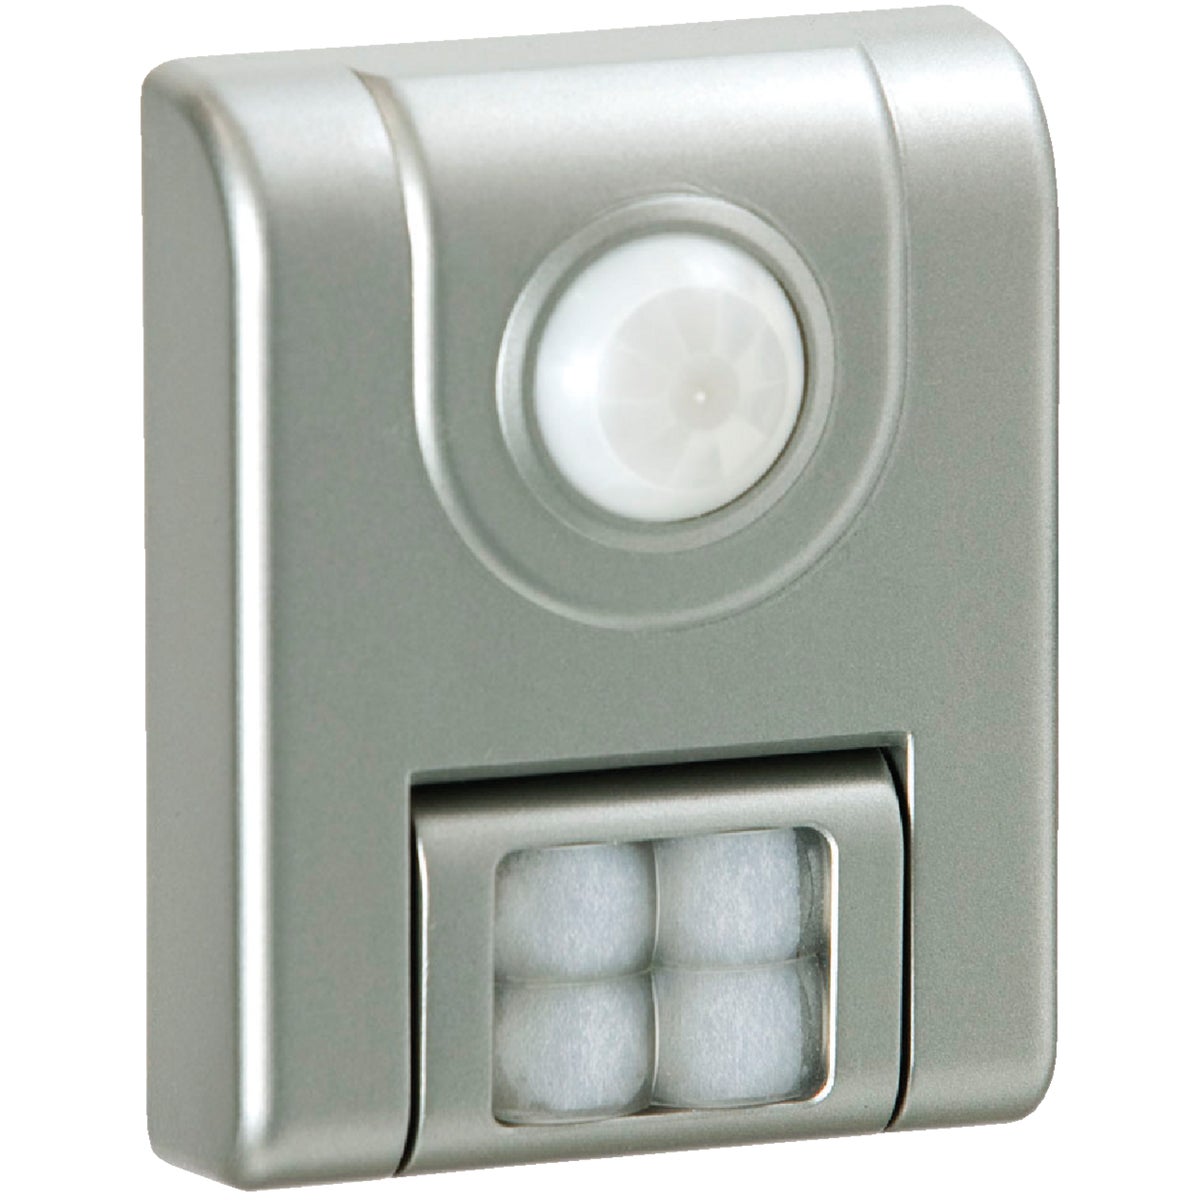 Item 500480, LED (light emitting diode) floodlight with bright, glare-free, wide 